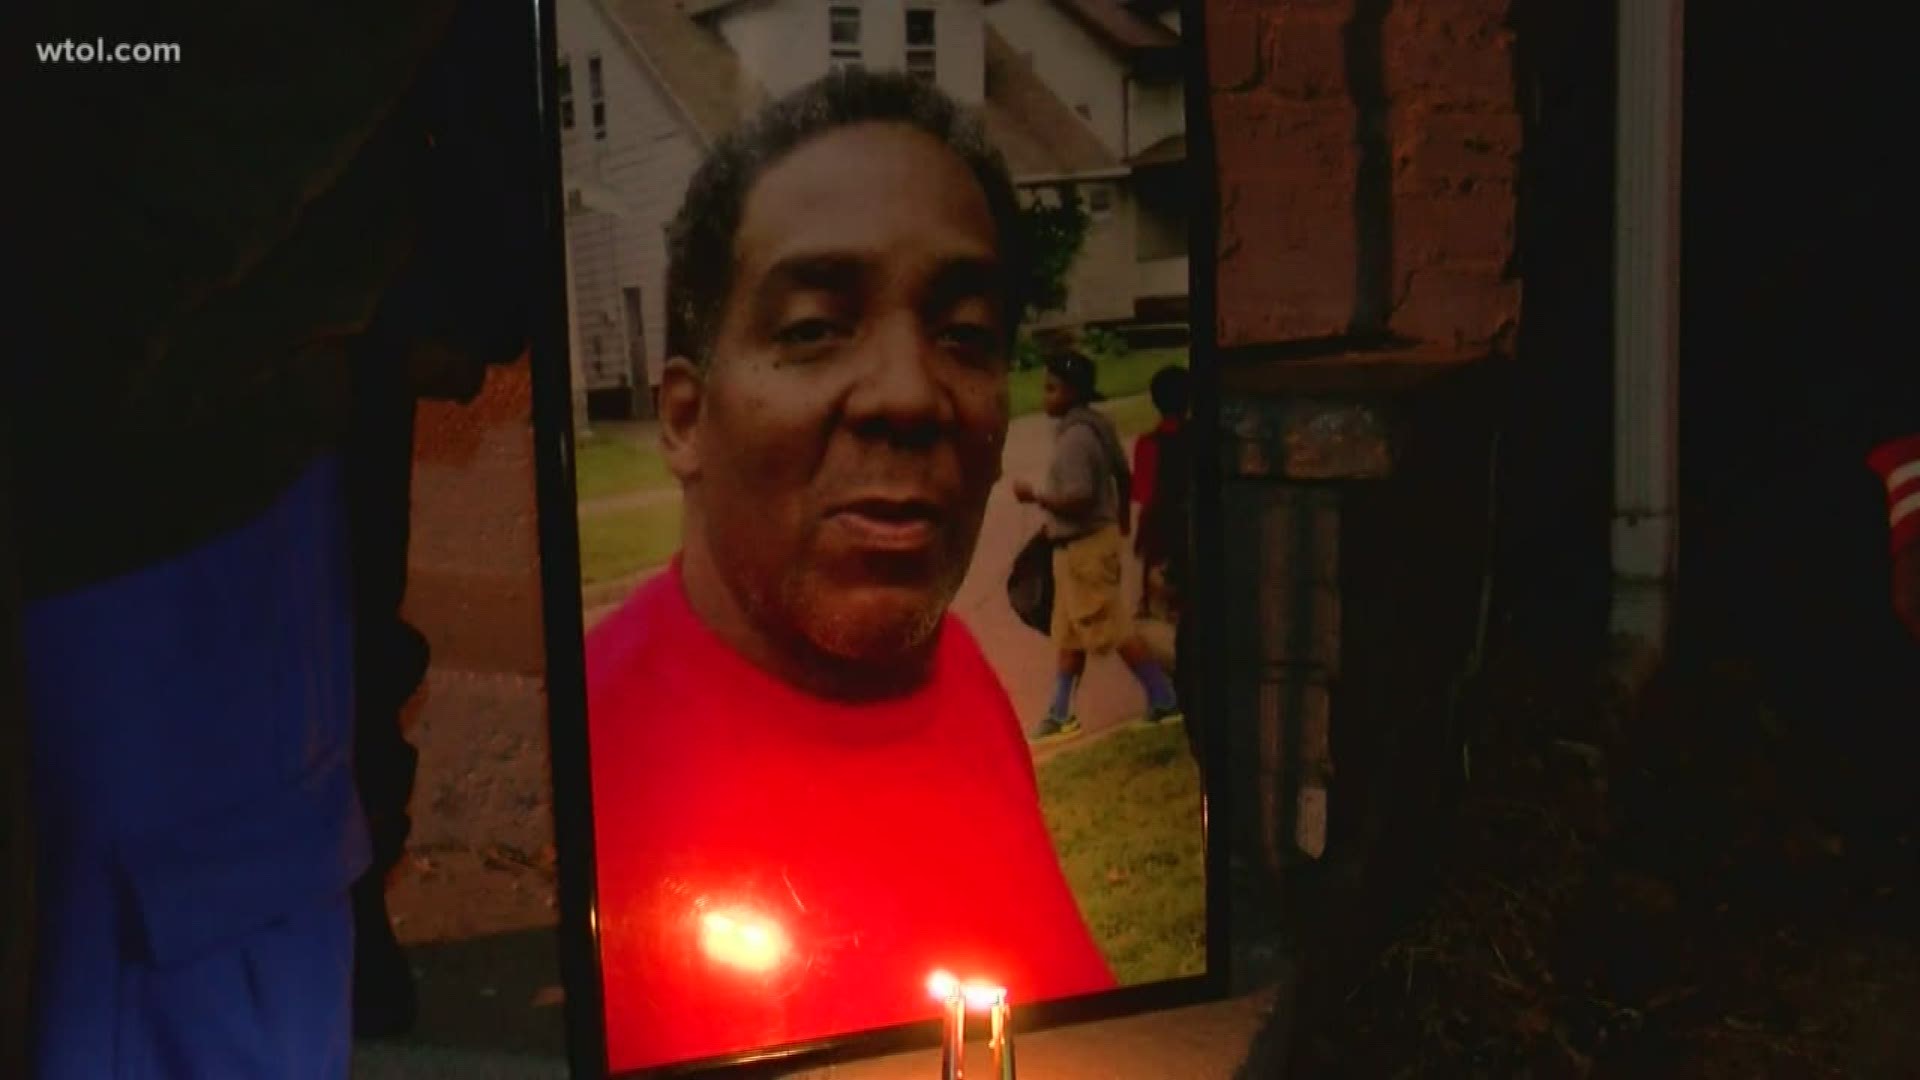 King's family gathered together on the five-year anniversary of his still-unsolved death.